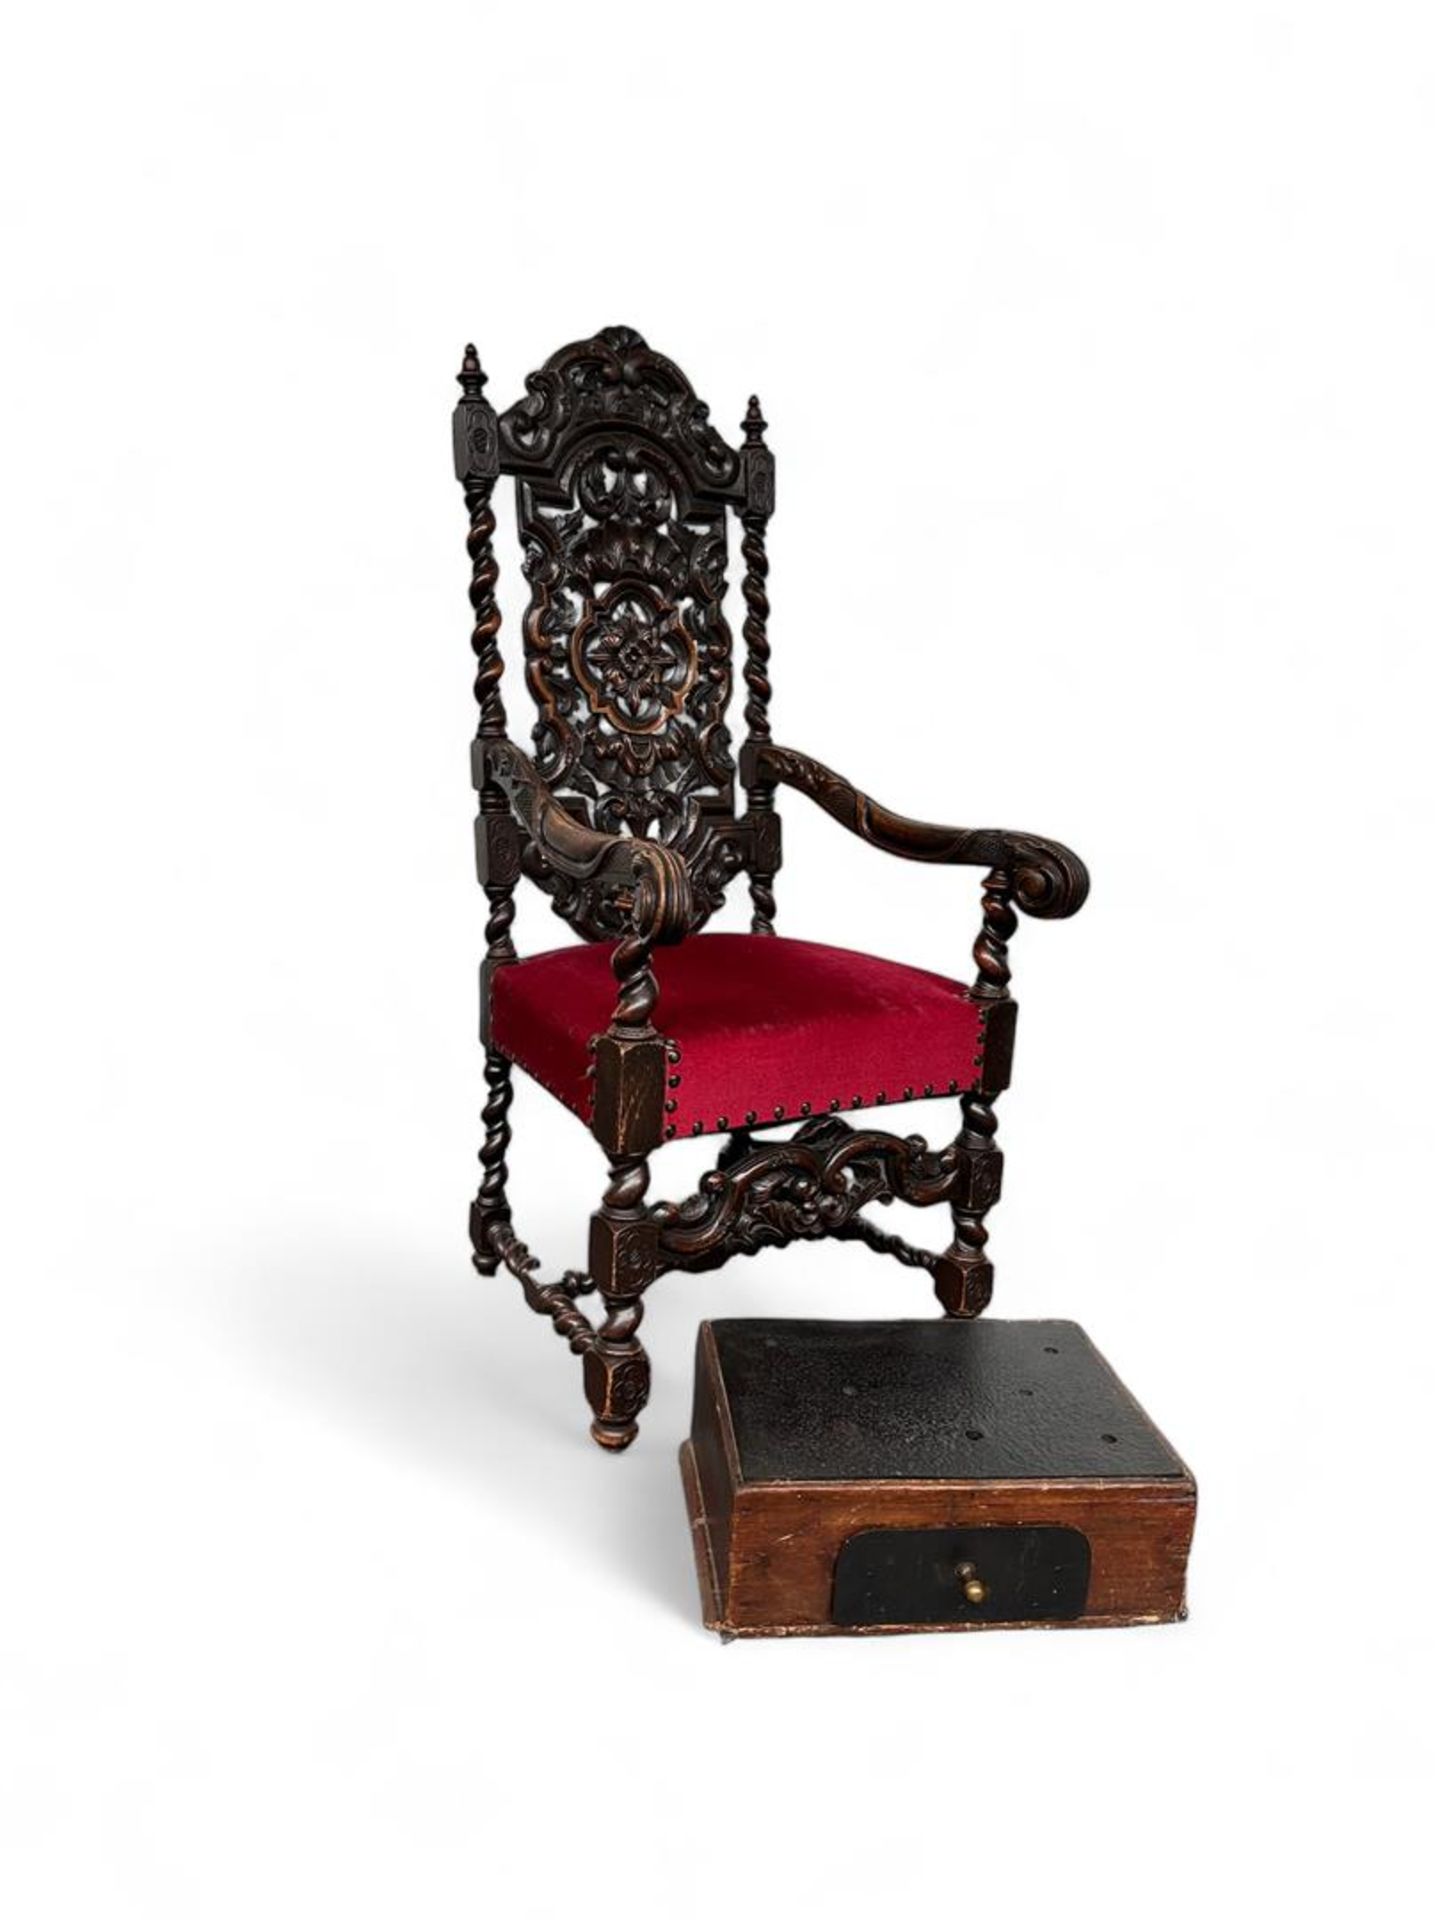 A large carved, Neo Renaissance throne chair, upholstered in red velvet. In addition, an oven with c